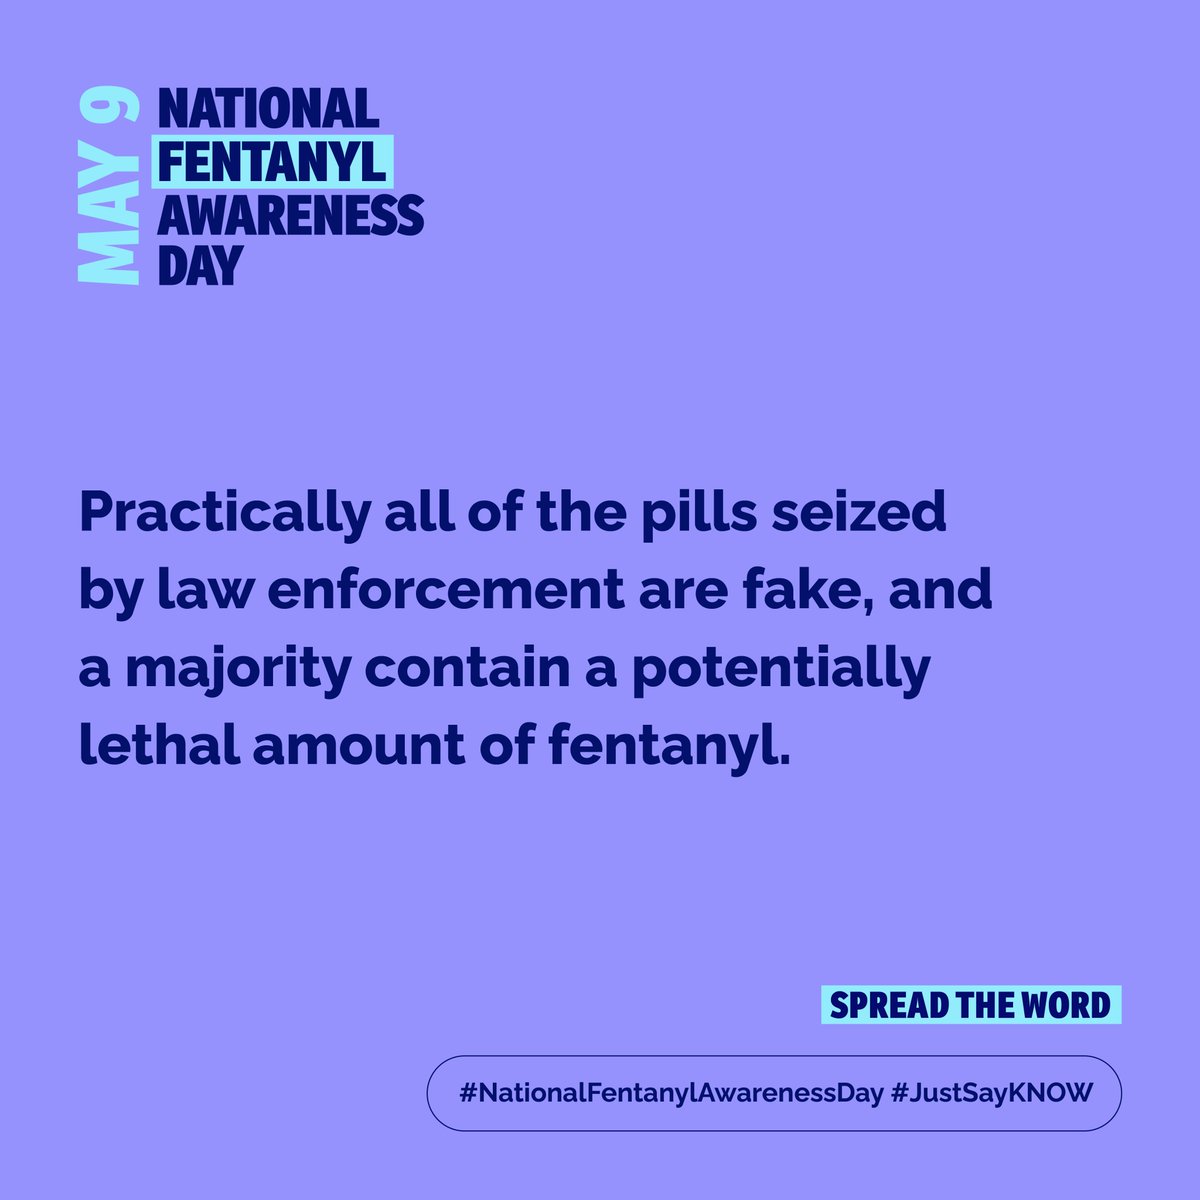 Fentanyl is odorless, tasteless, cheap and extremely potent. Often found in fake prescription pills disguised as Oxy, Percocet and Xanax. Spread the word & save lives.

You can find FREE Narcan and Fentanyl Testing Strips at Flint MTA.
 
#NationalFentanylAwarenessDay #JustSayKNOW